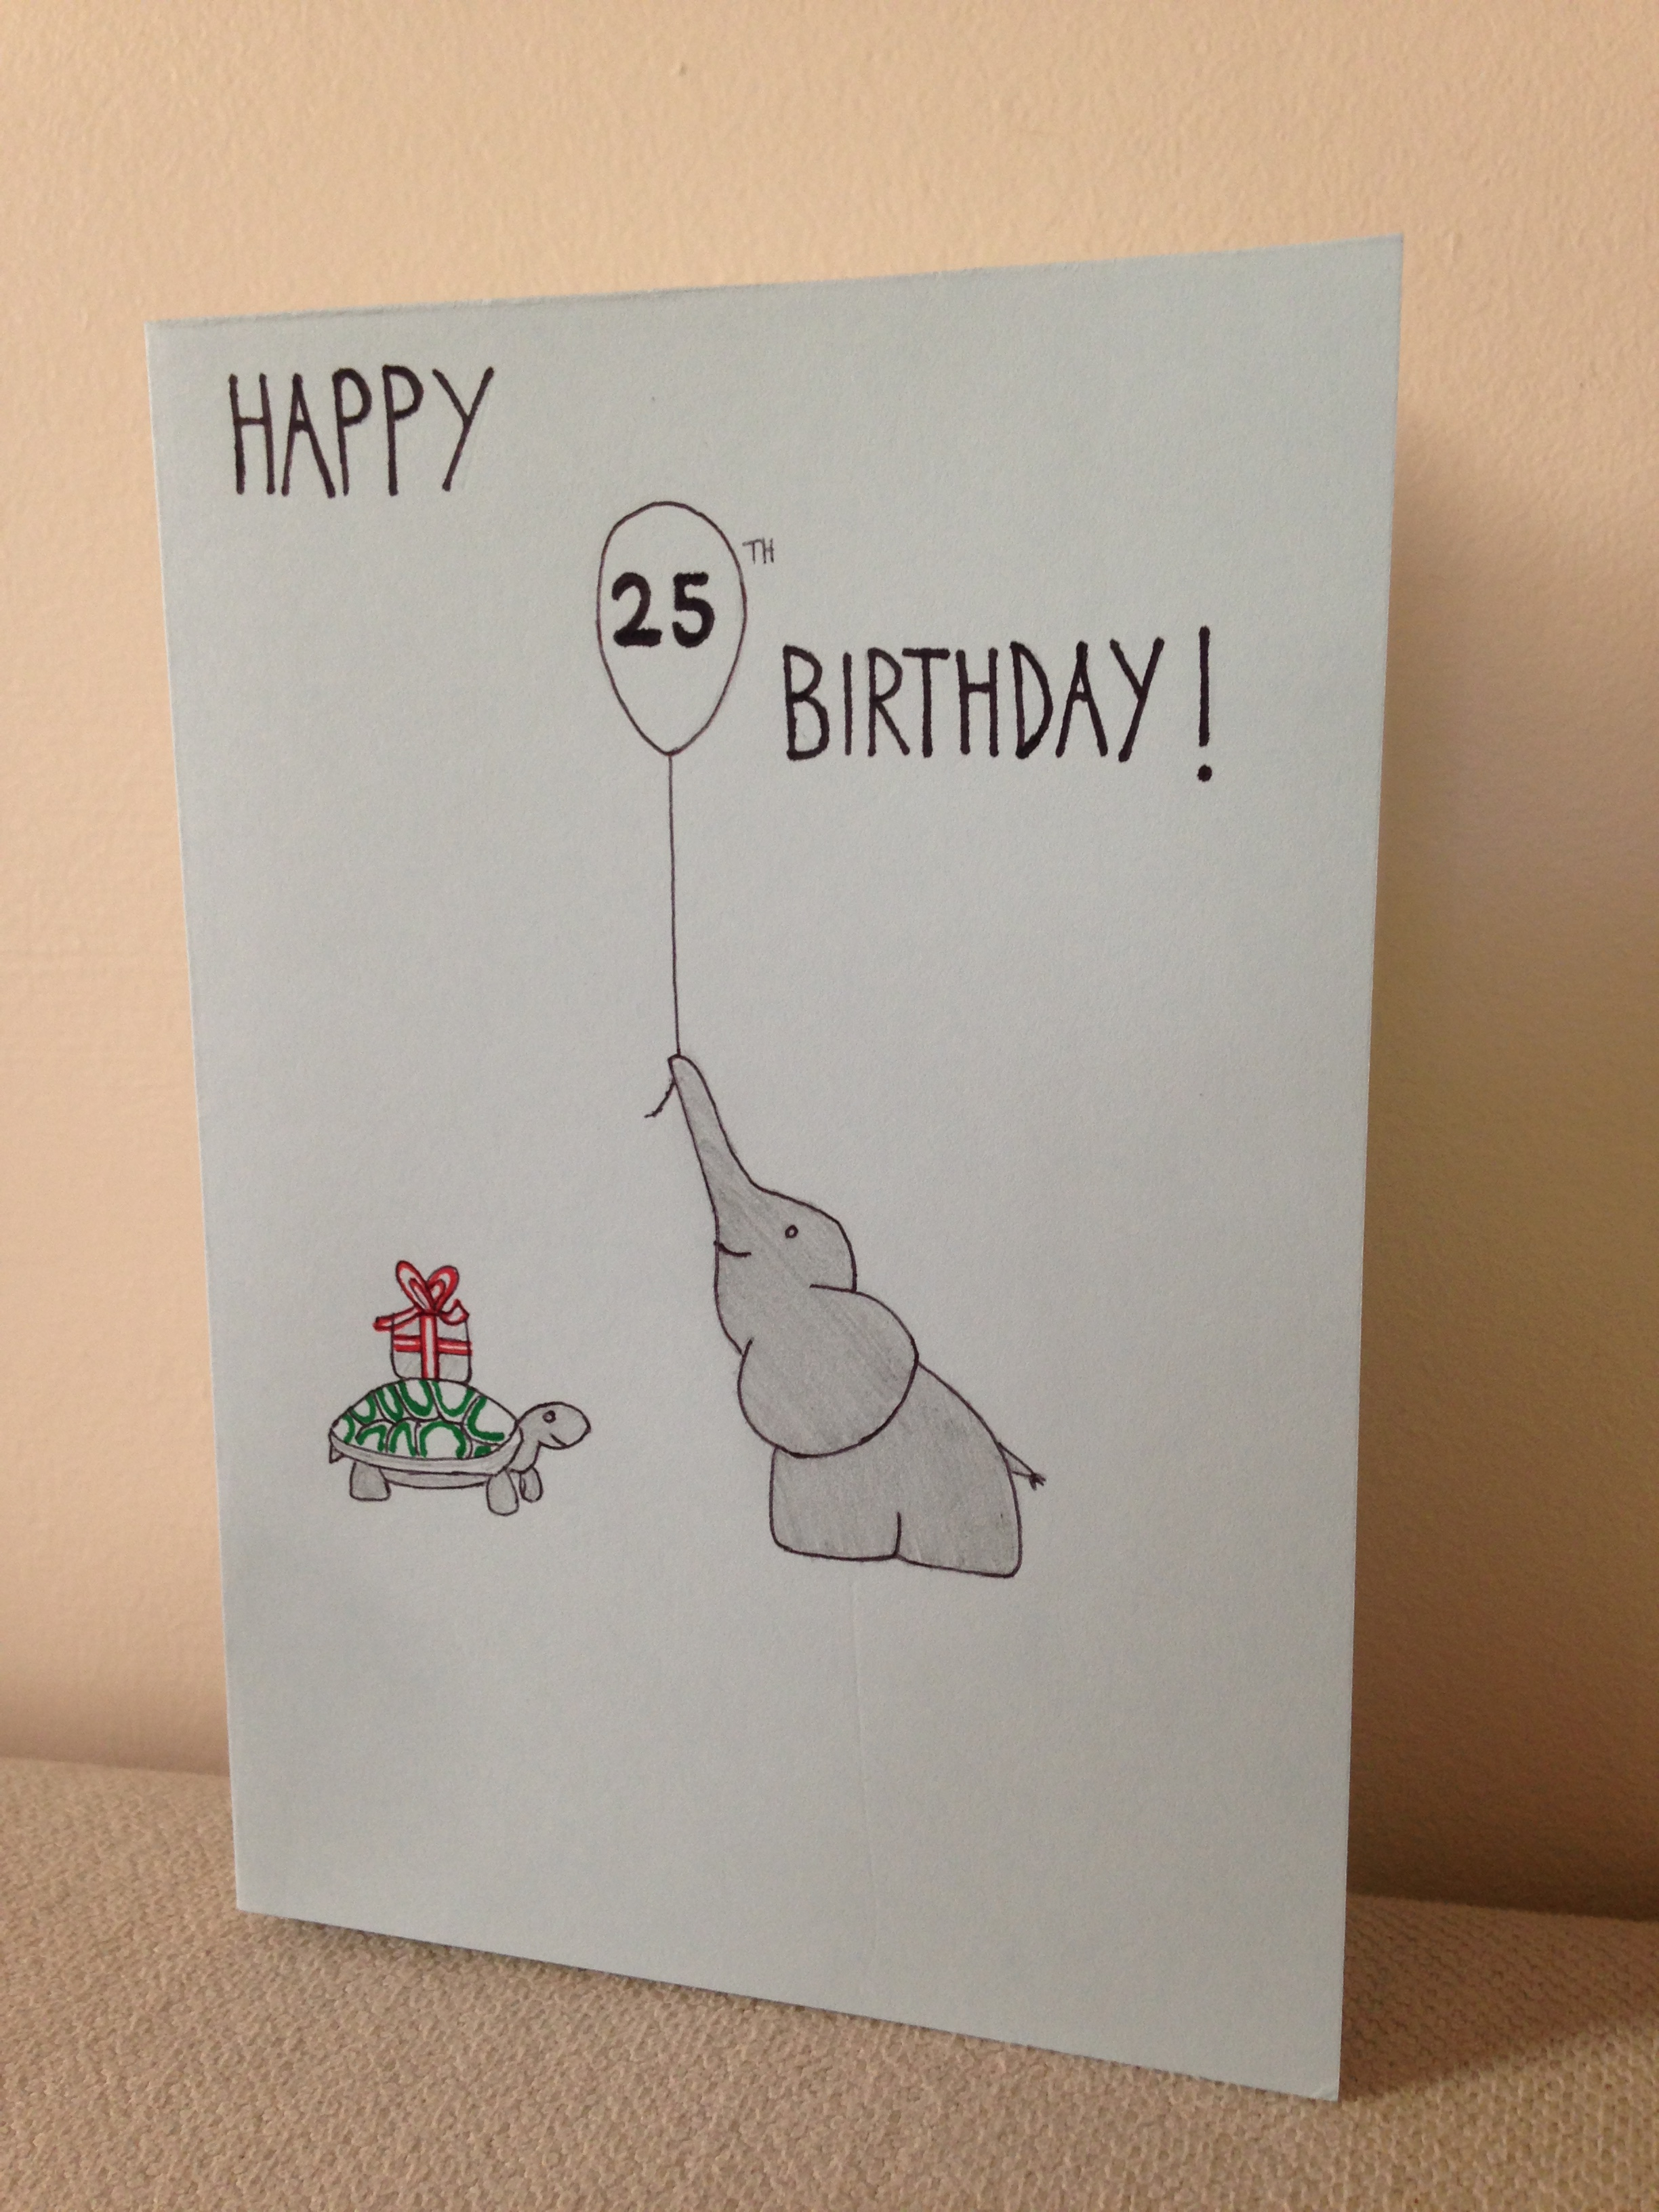 Handmade Birthday Card Ideas Birthday Cards Ideas Drawing At Getdrawings Free For Personal